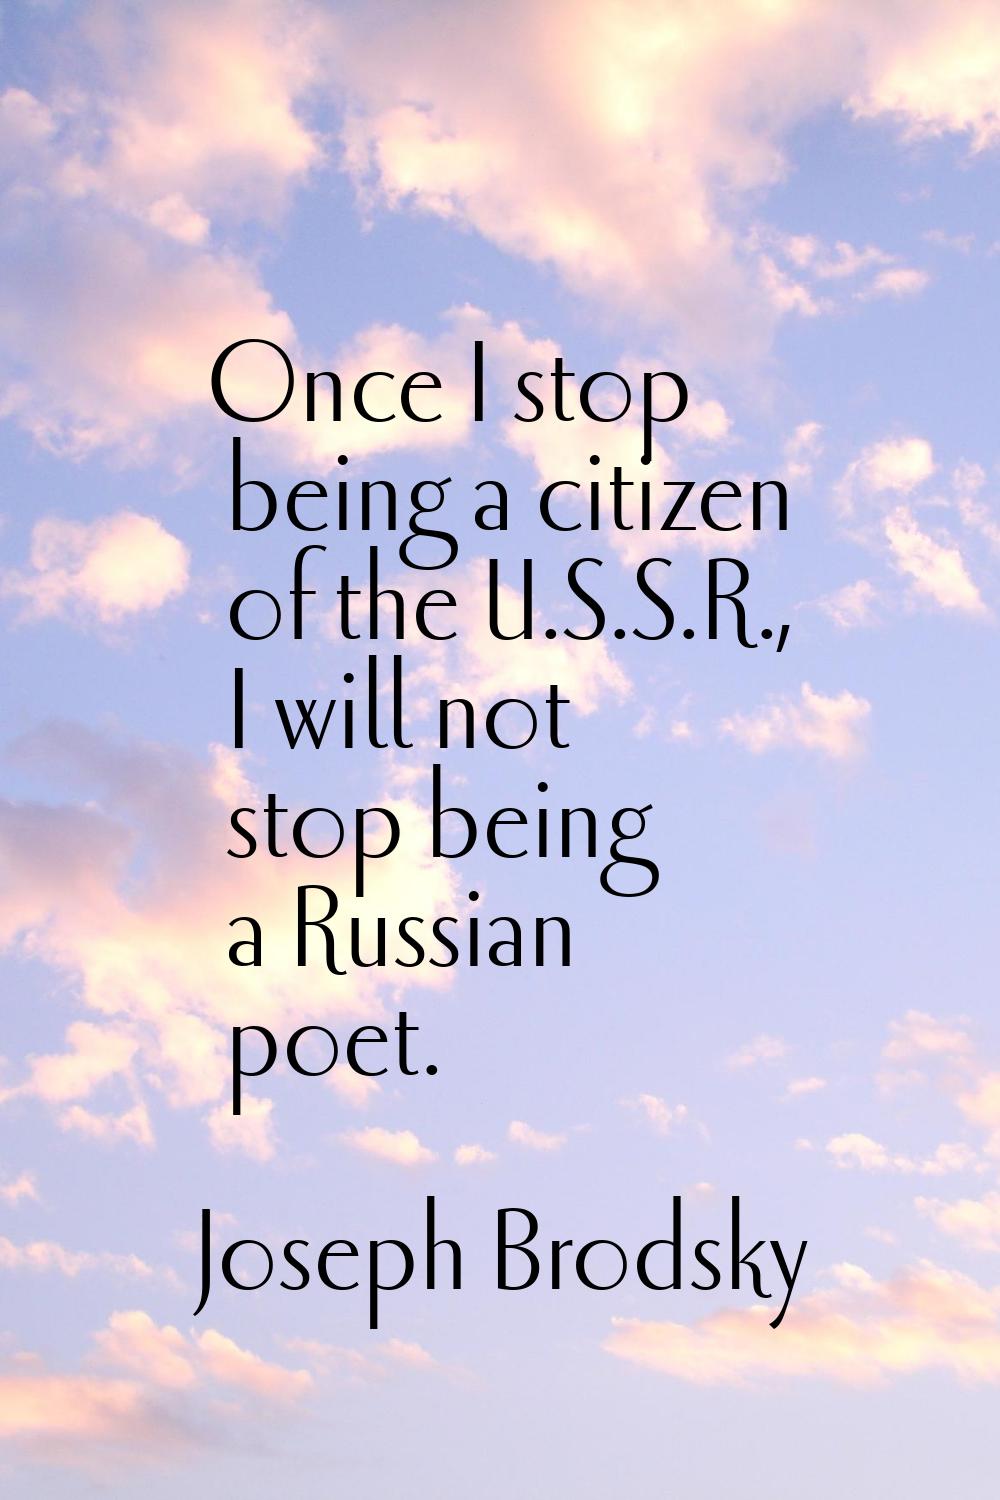 Once I stop being a citizen of the U.S.S.R., I will not stop being a Russian poet.